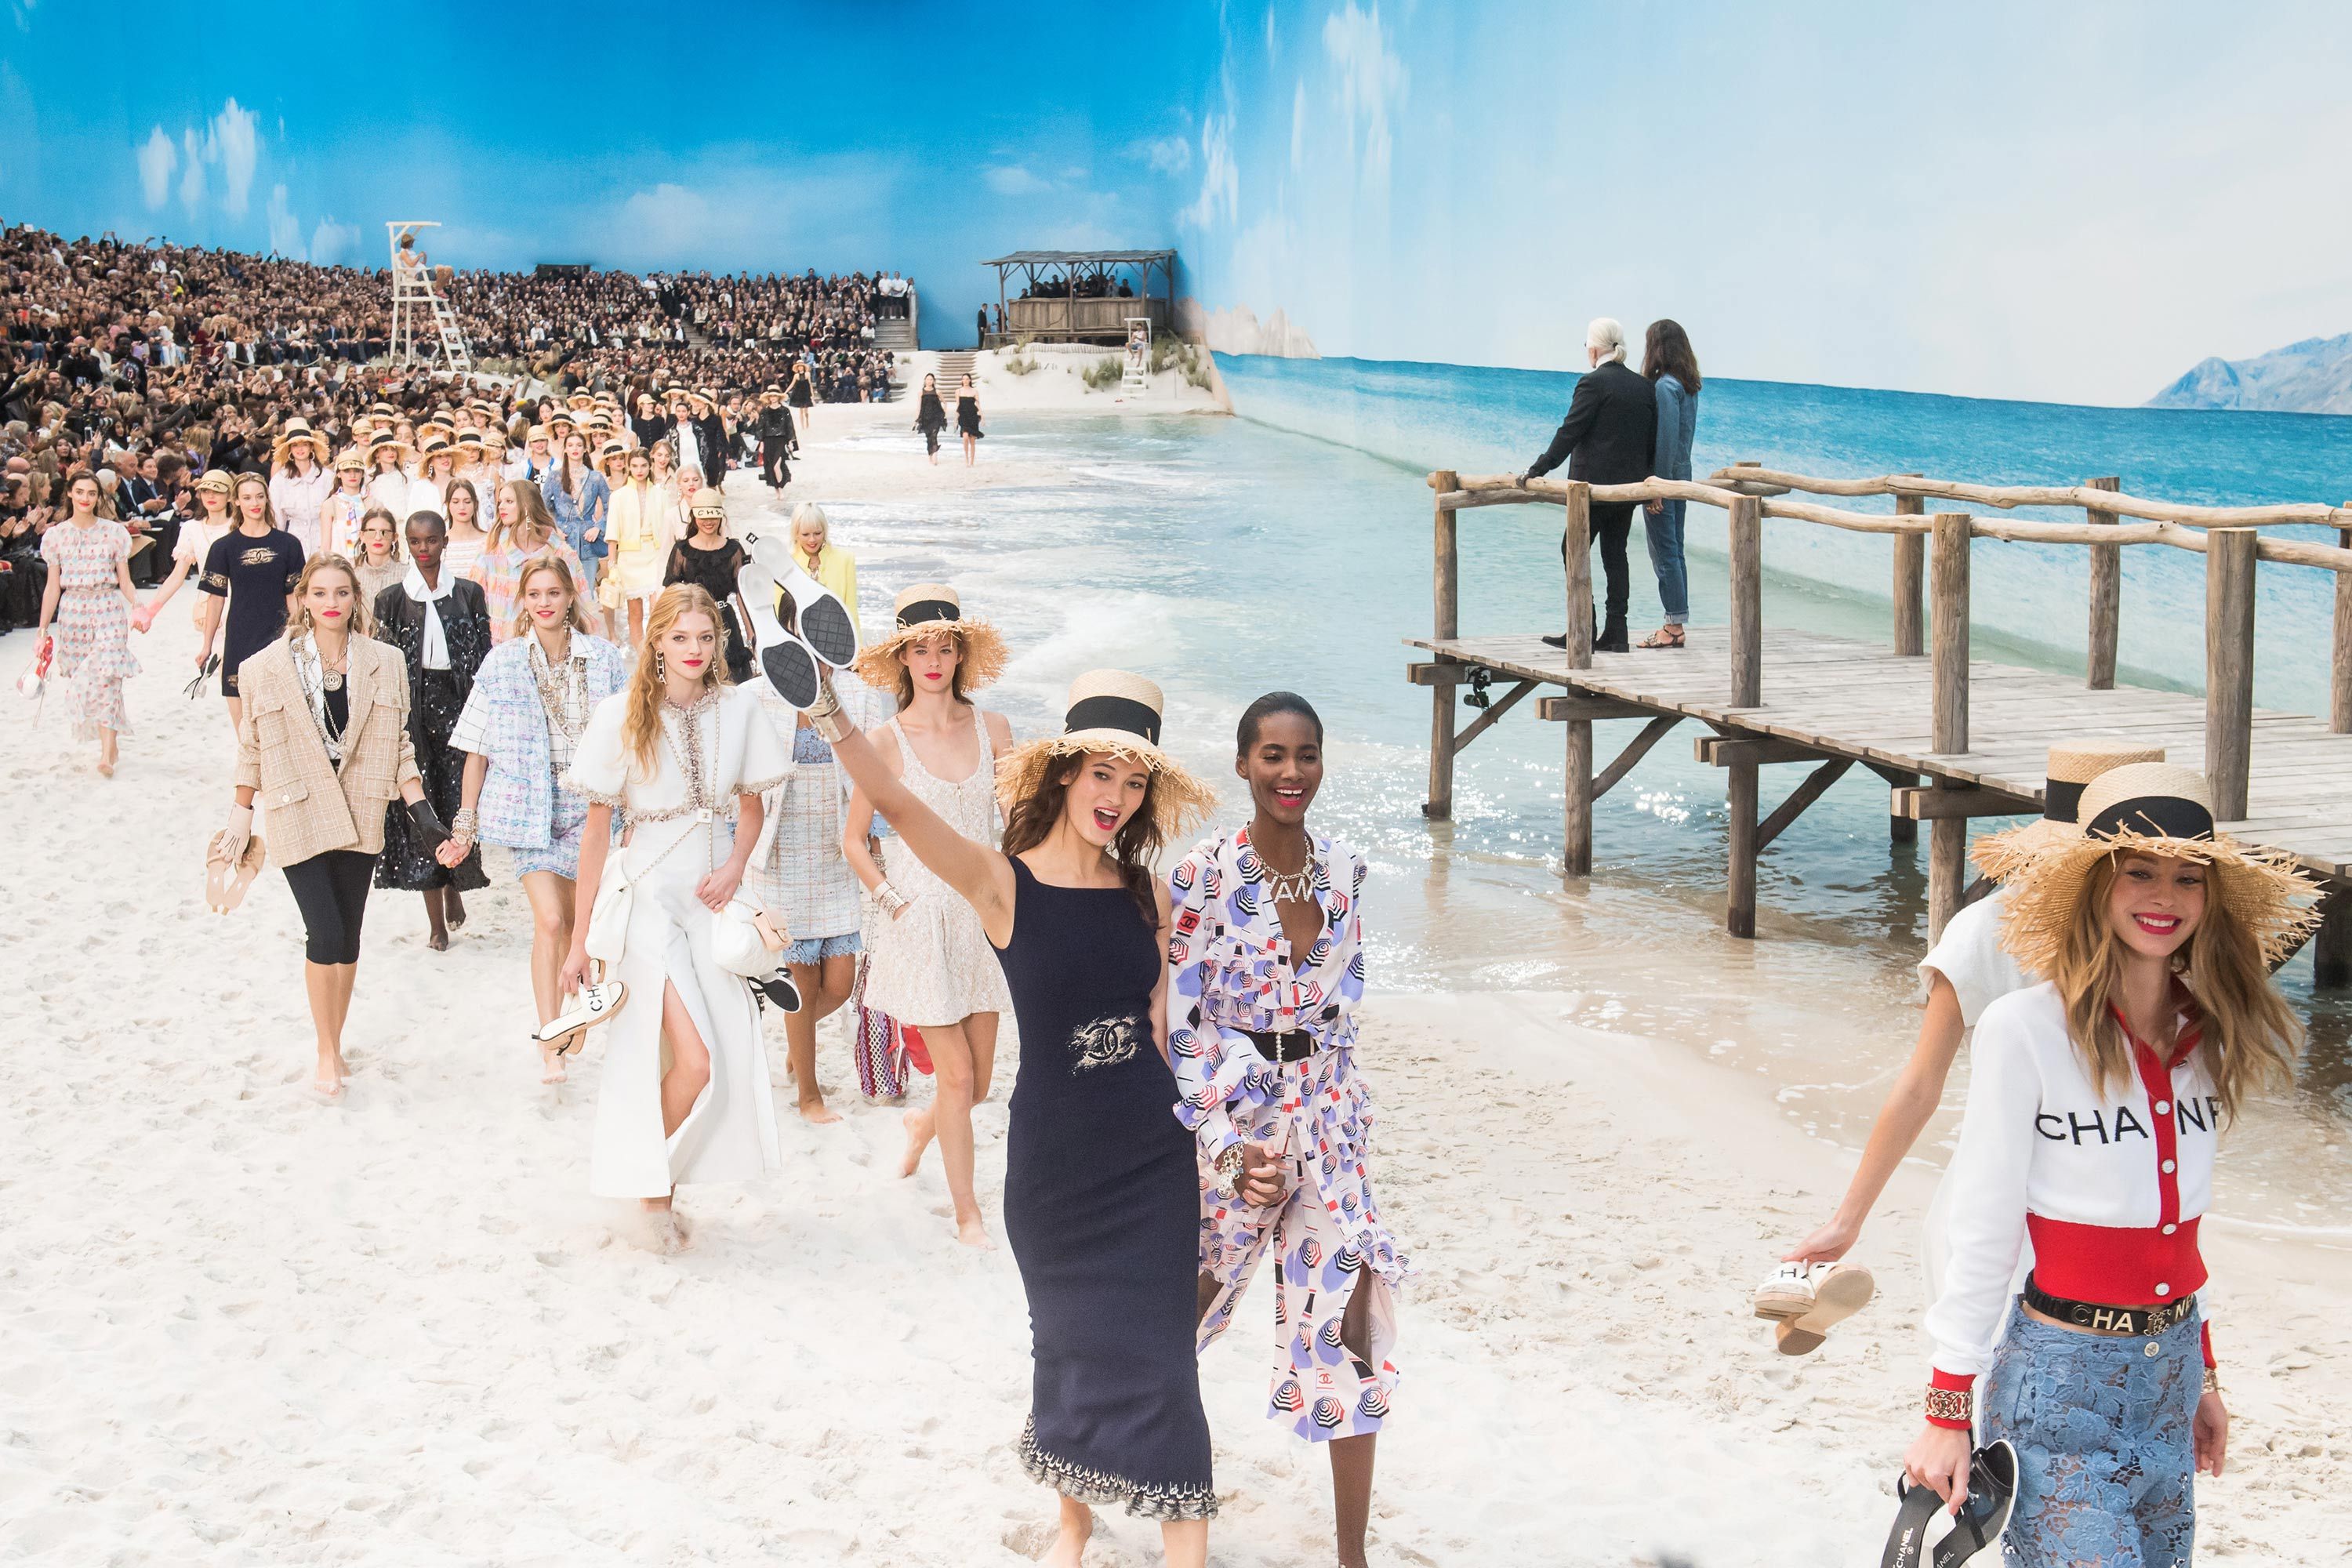 Chanel takes us on holiday with its impressive beach set